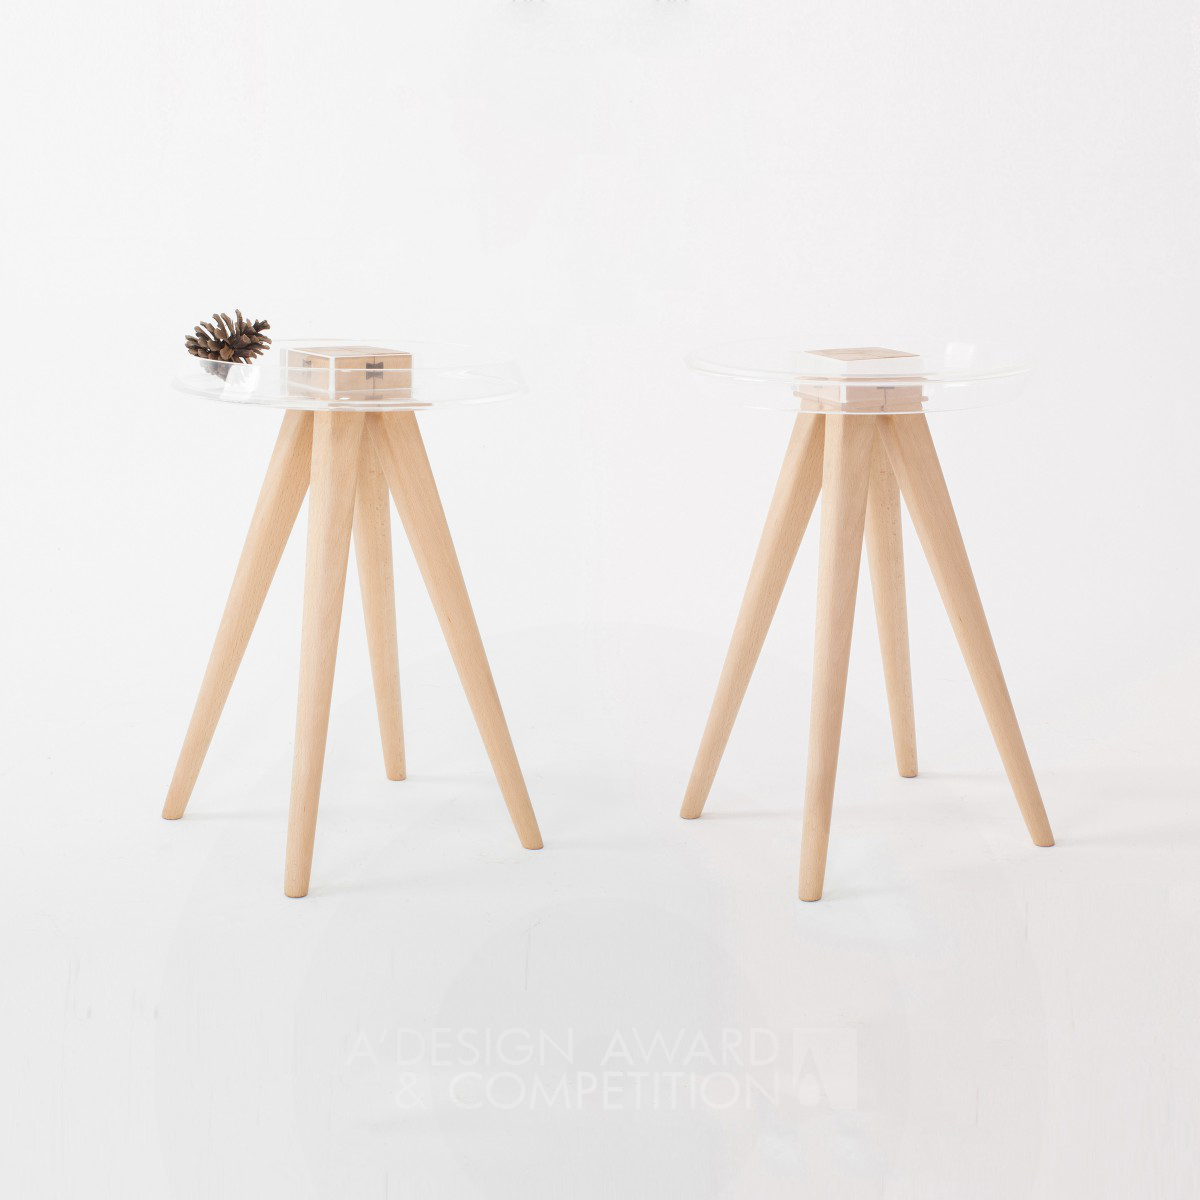 Square and Round A Multifunctional Stool